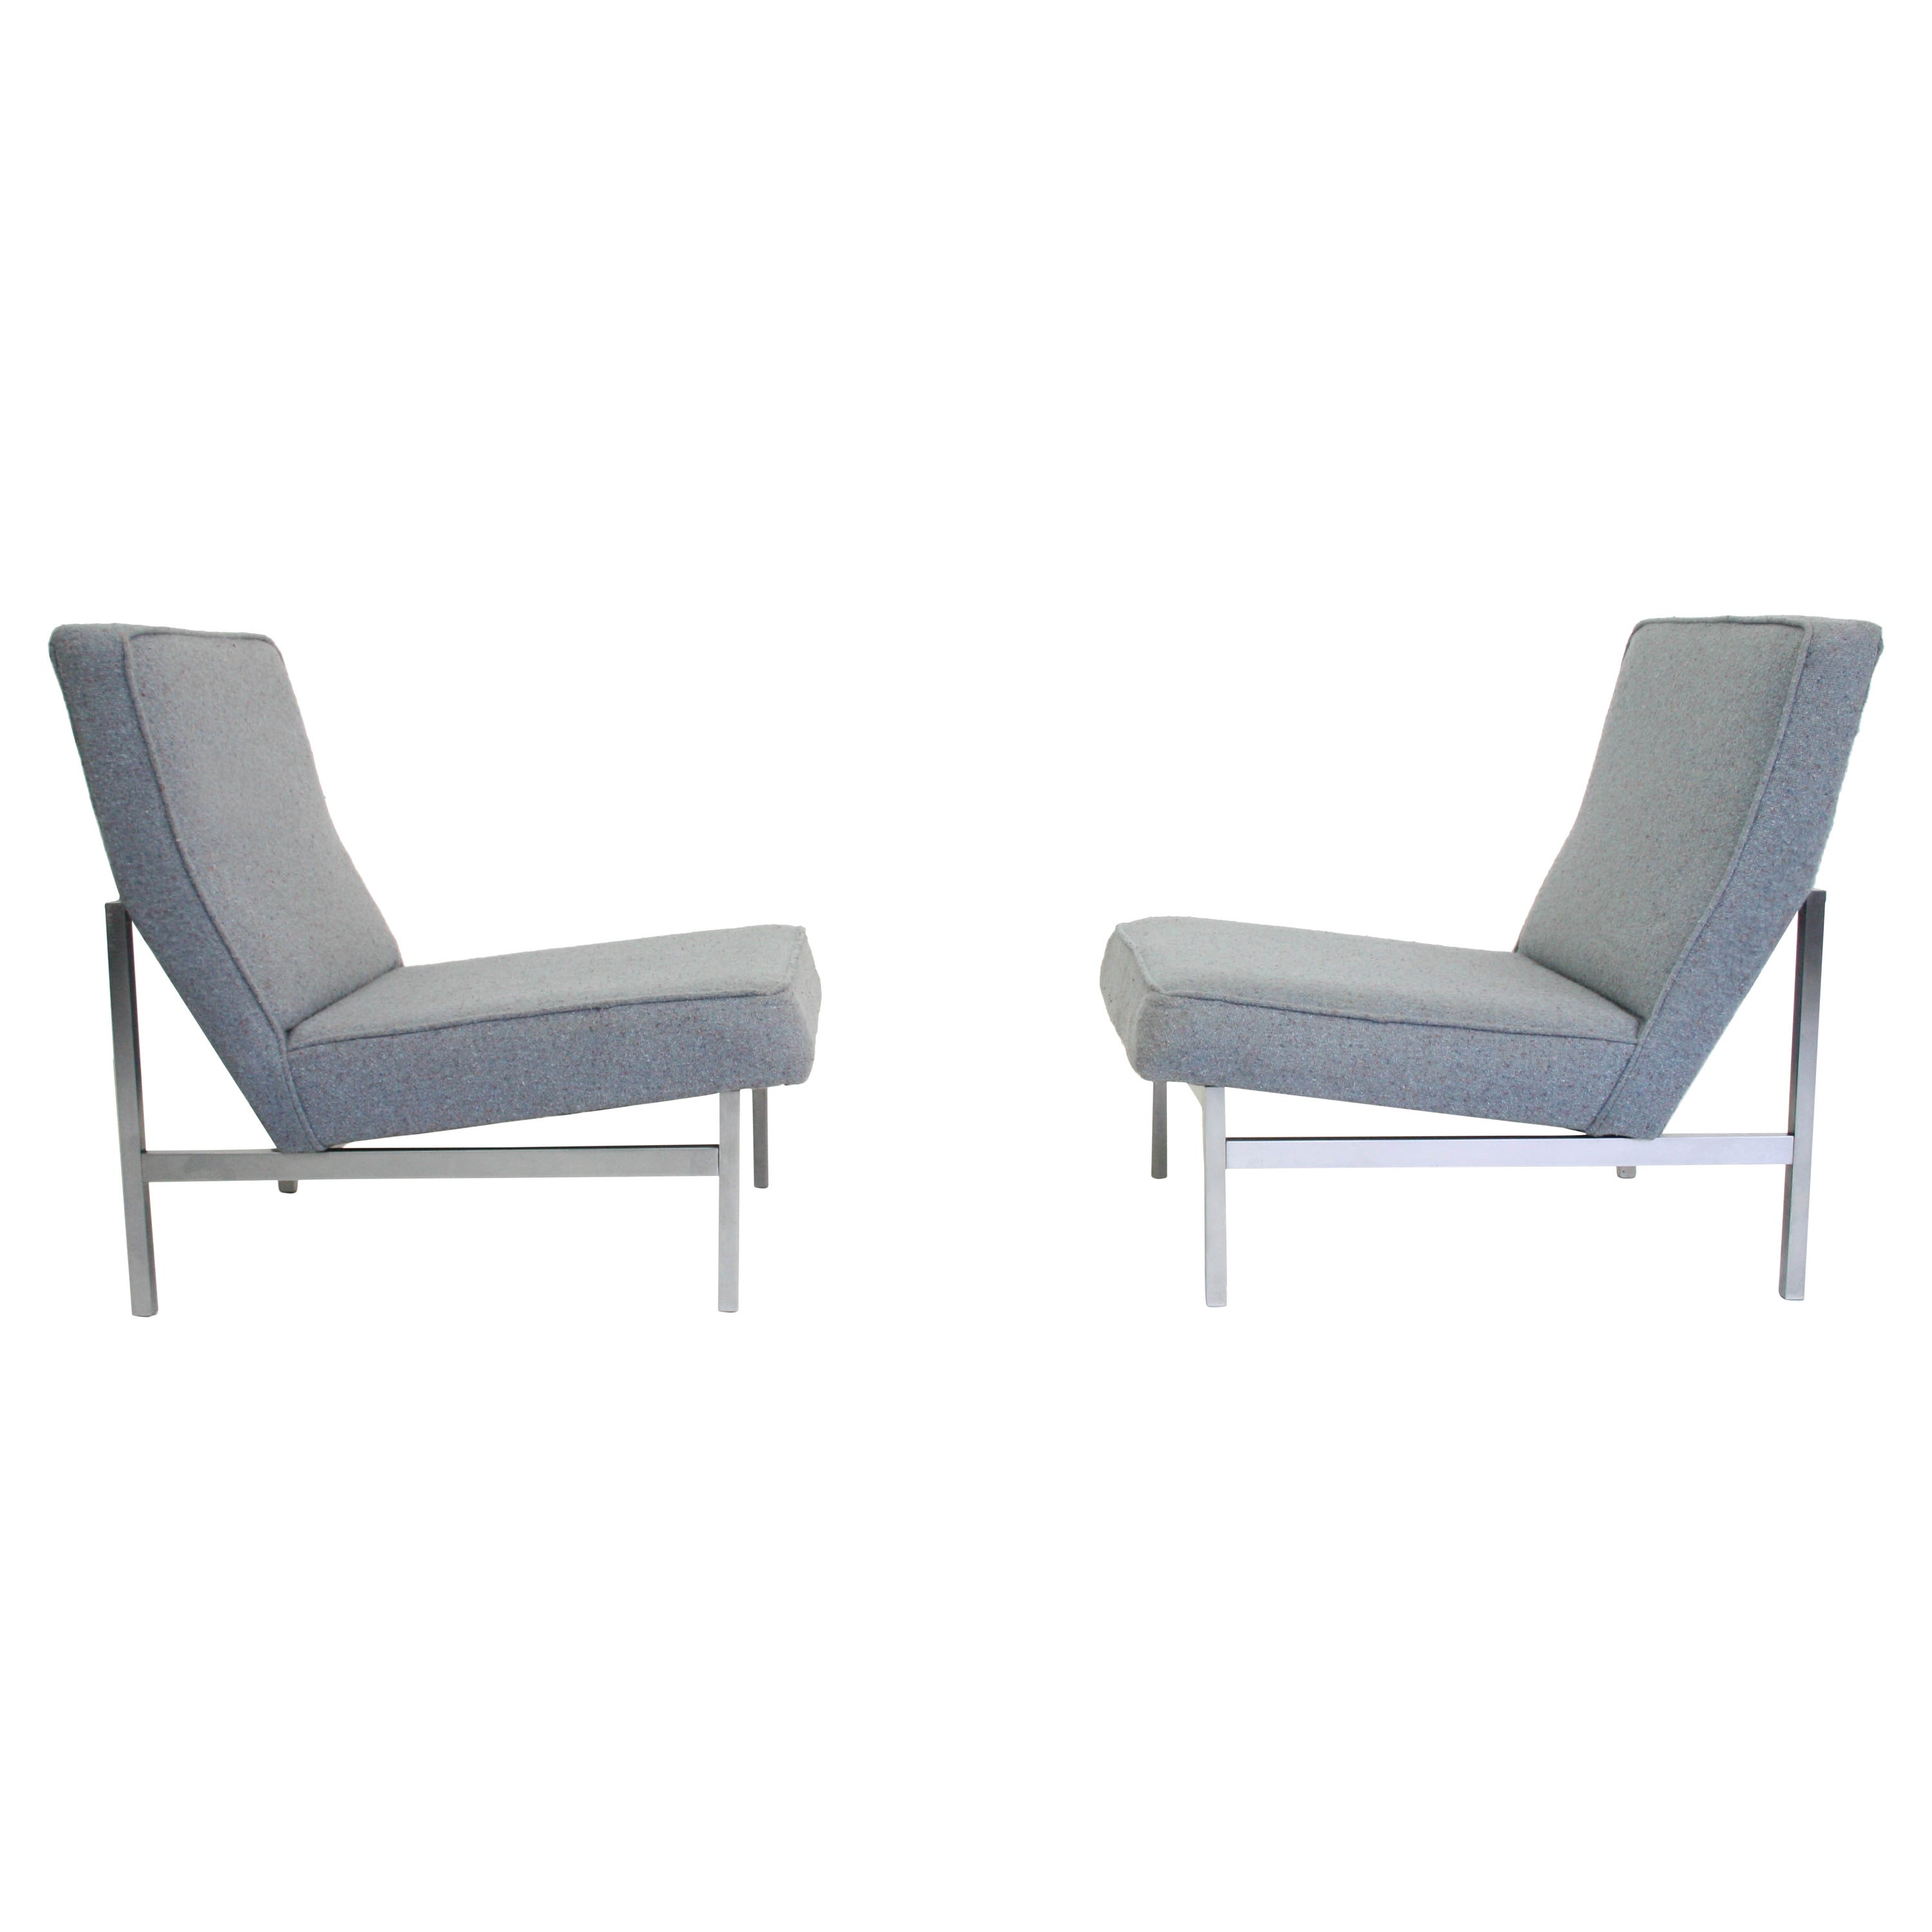 Pair of Florence Knoll Lounge Chairs, Model 2251, Knoll Associates, USA, 1955